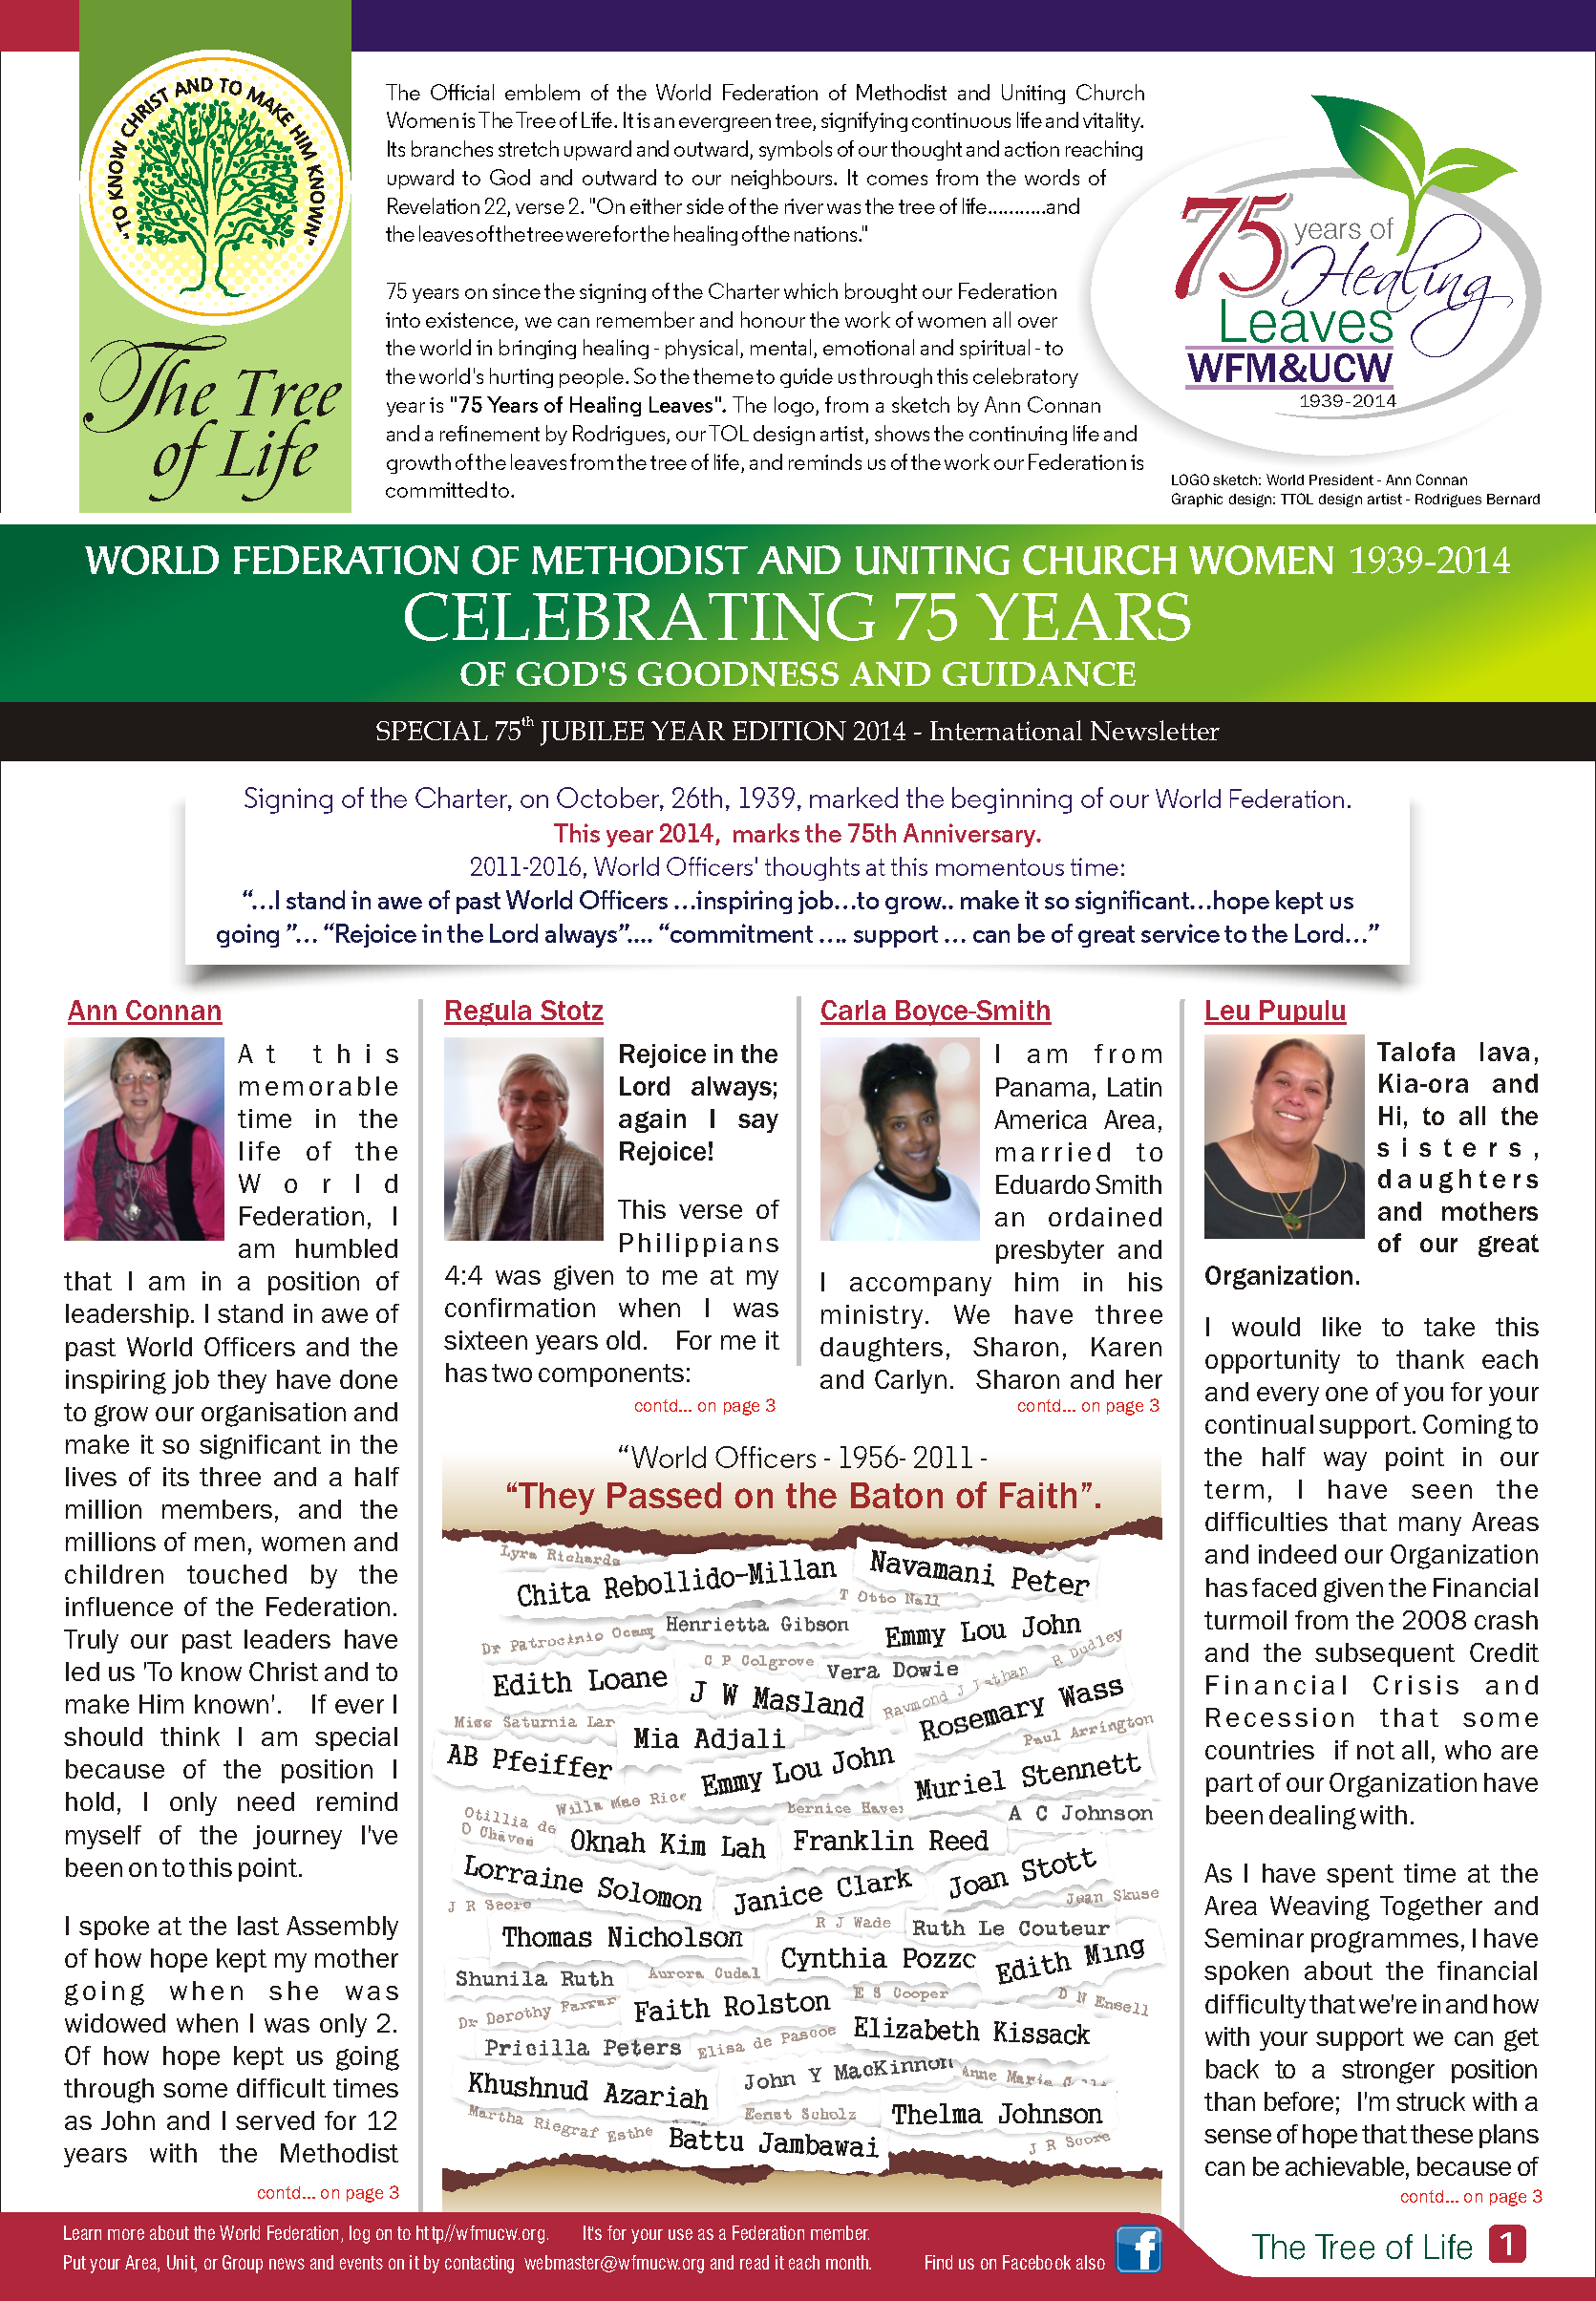 The Tree of Life (Special 75th Jubilee Year Edition 2014)